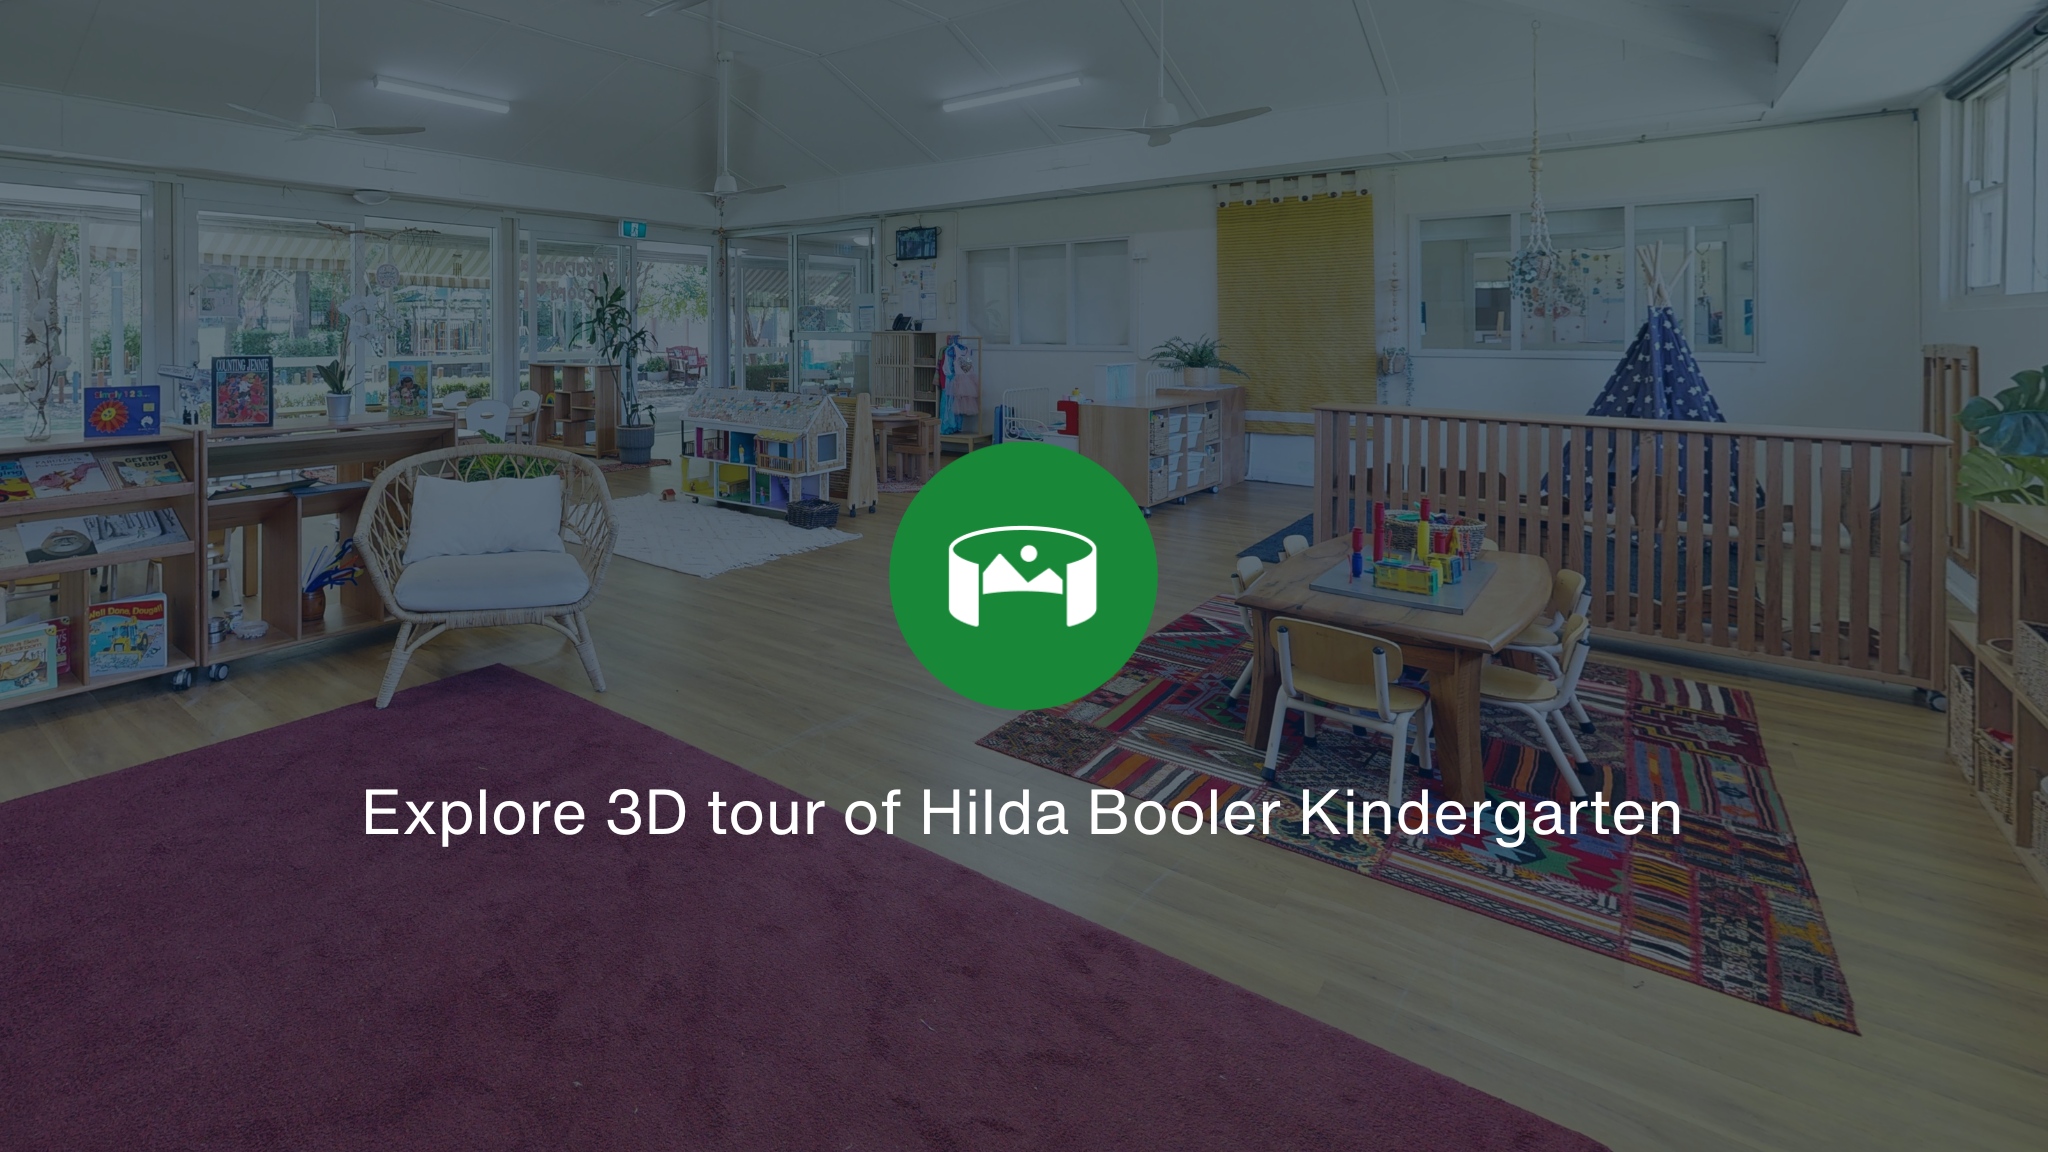 Inside the playroom at Hilda Booler Kindergaten overlayed with a green icon and the words Explore 3D tour of Hilda Booler Kindergarten.